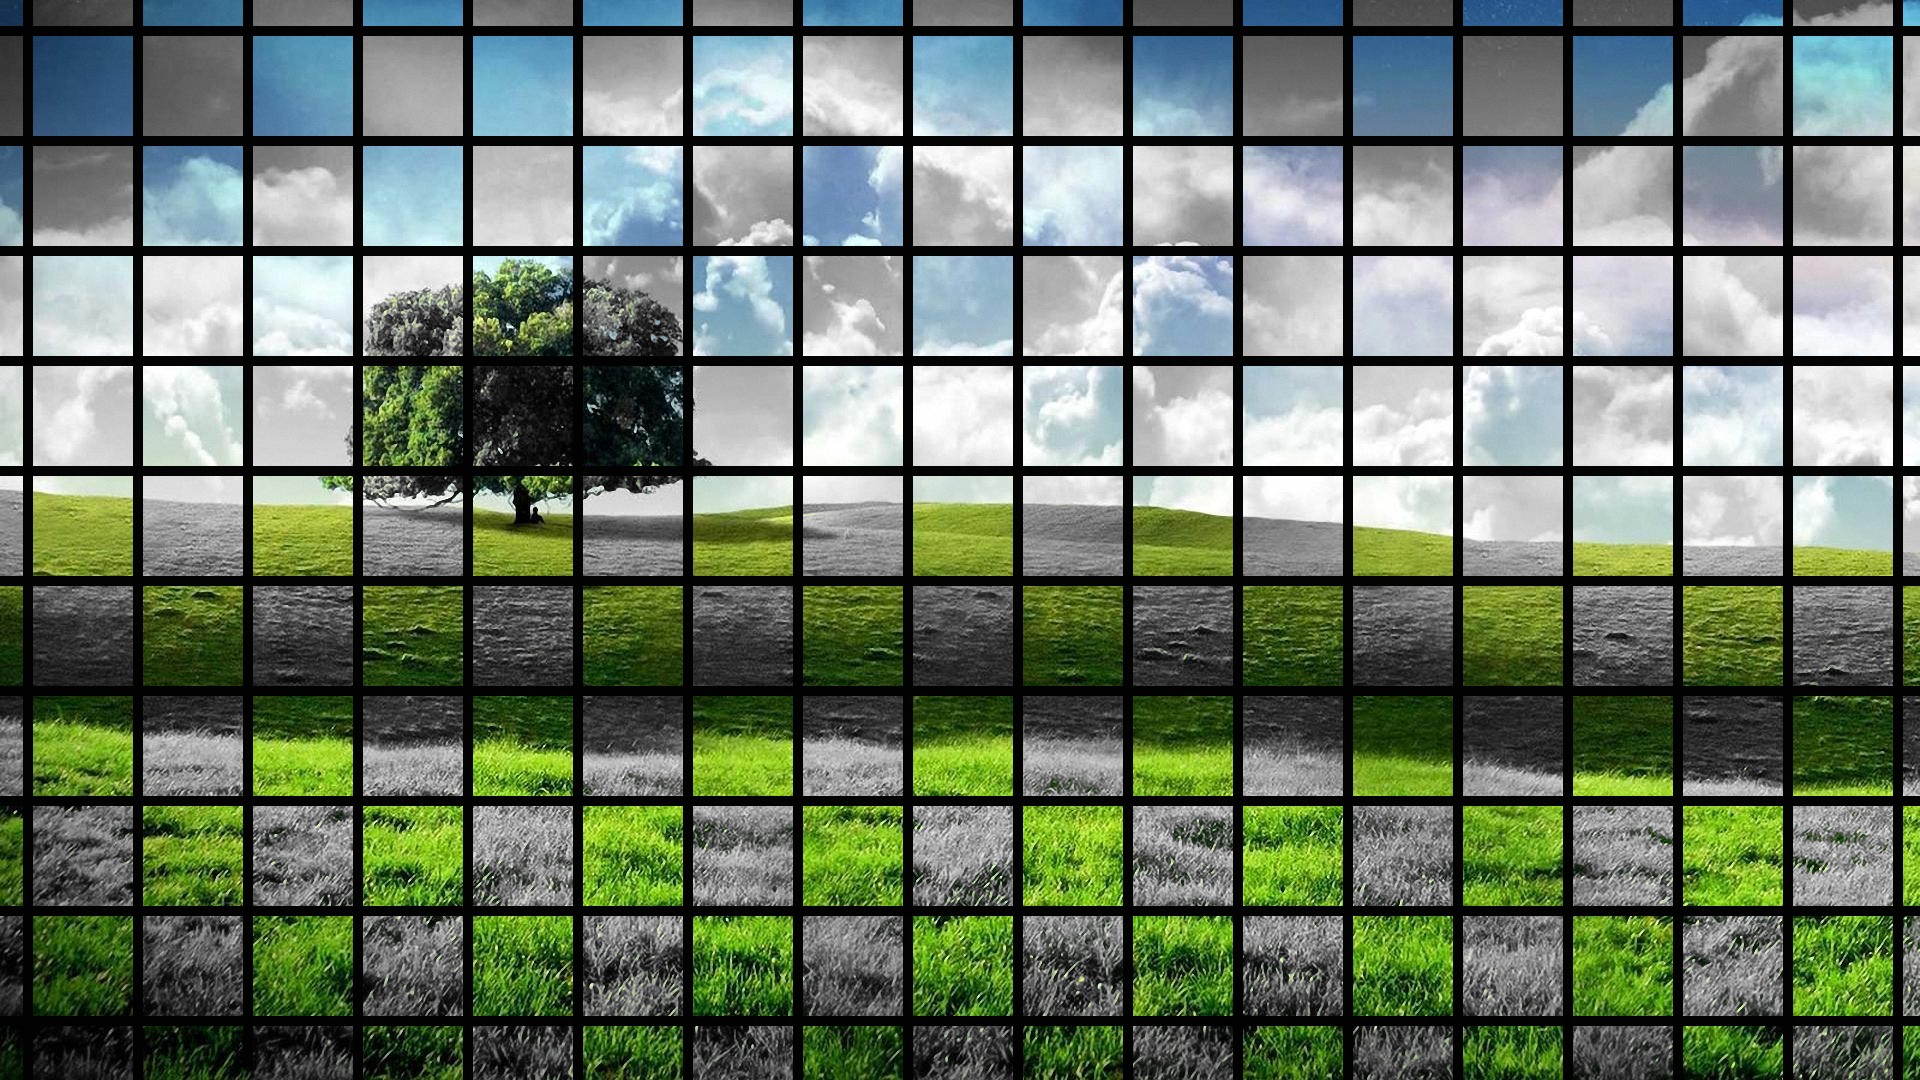 General 1920x1080 nature artwork trees landscape checkered